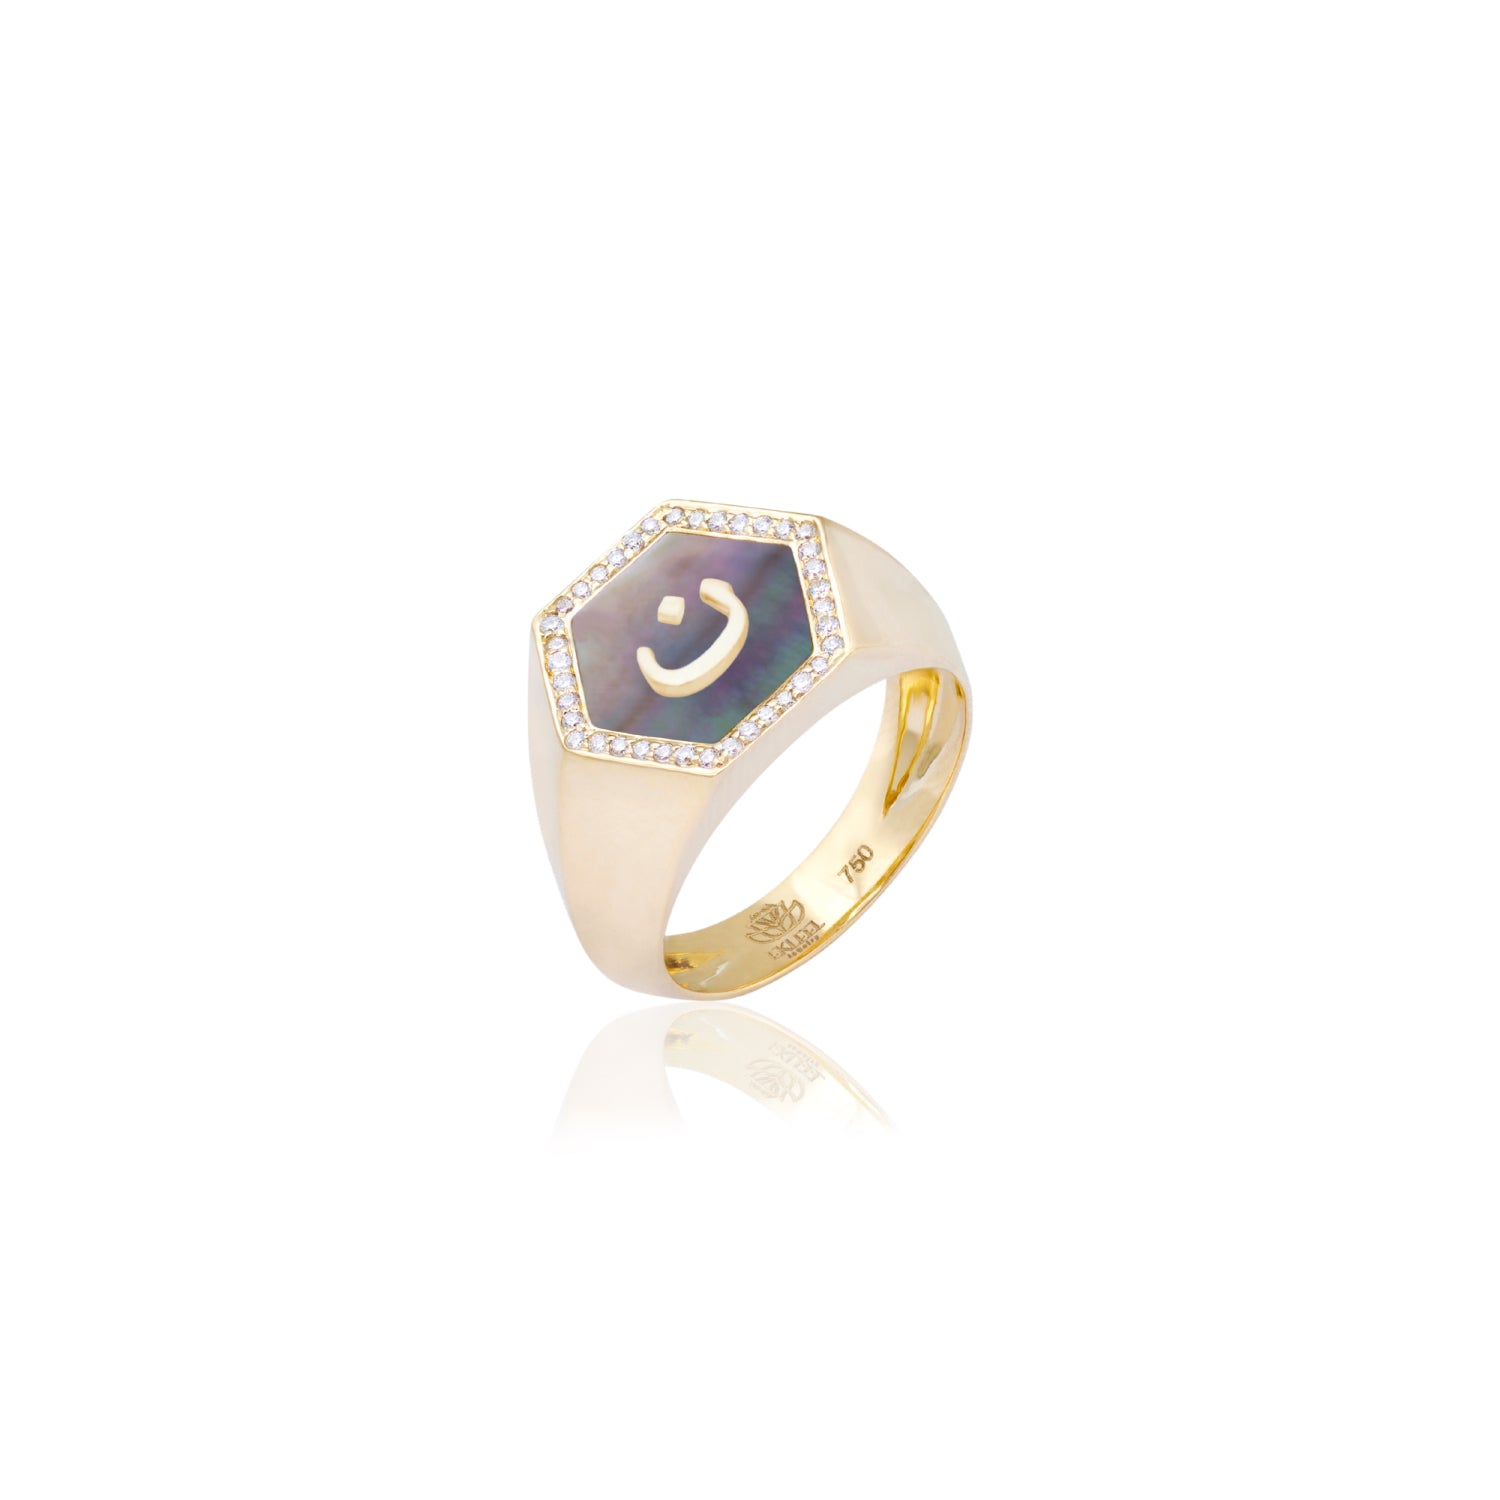 Qamoos 2.0 Letter ن Black Mother of Pearl and Diamond Signet Ring in Yellow Gold